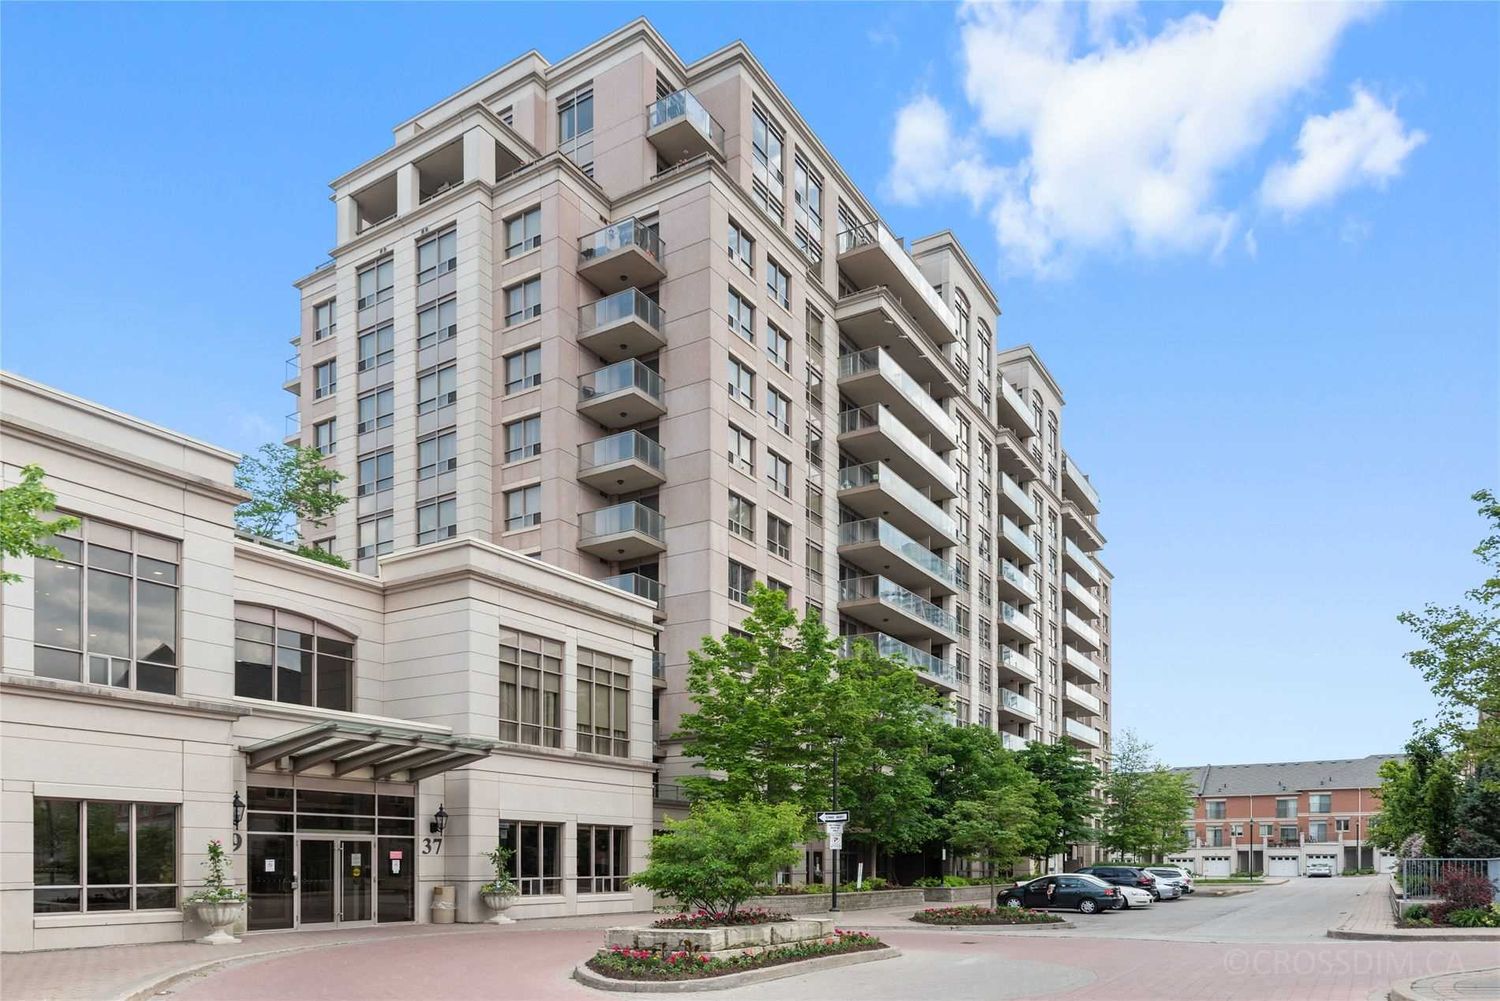 37-39 Galleria Parkway. Parkview Towers - Condos & Townhomes is located in  Markham, Toronto - image #2 of 2